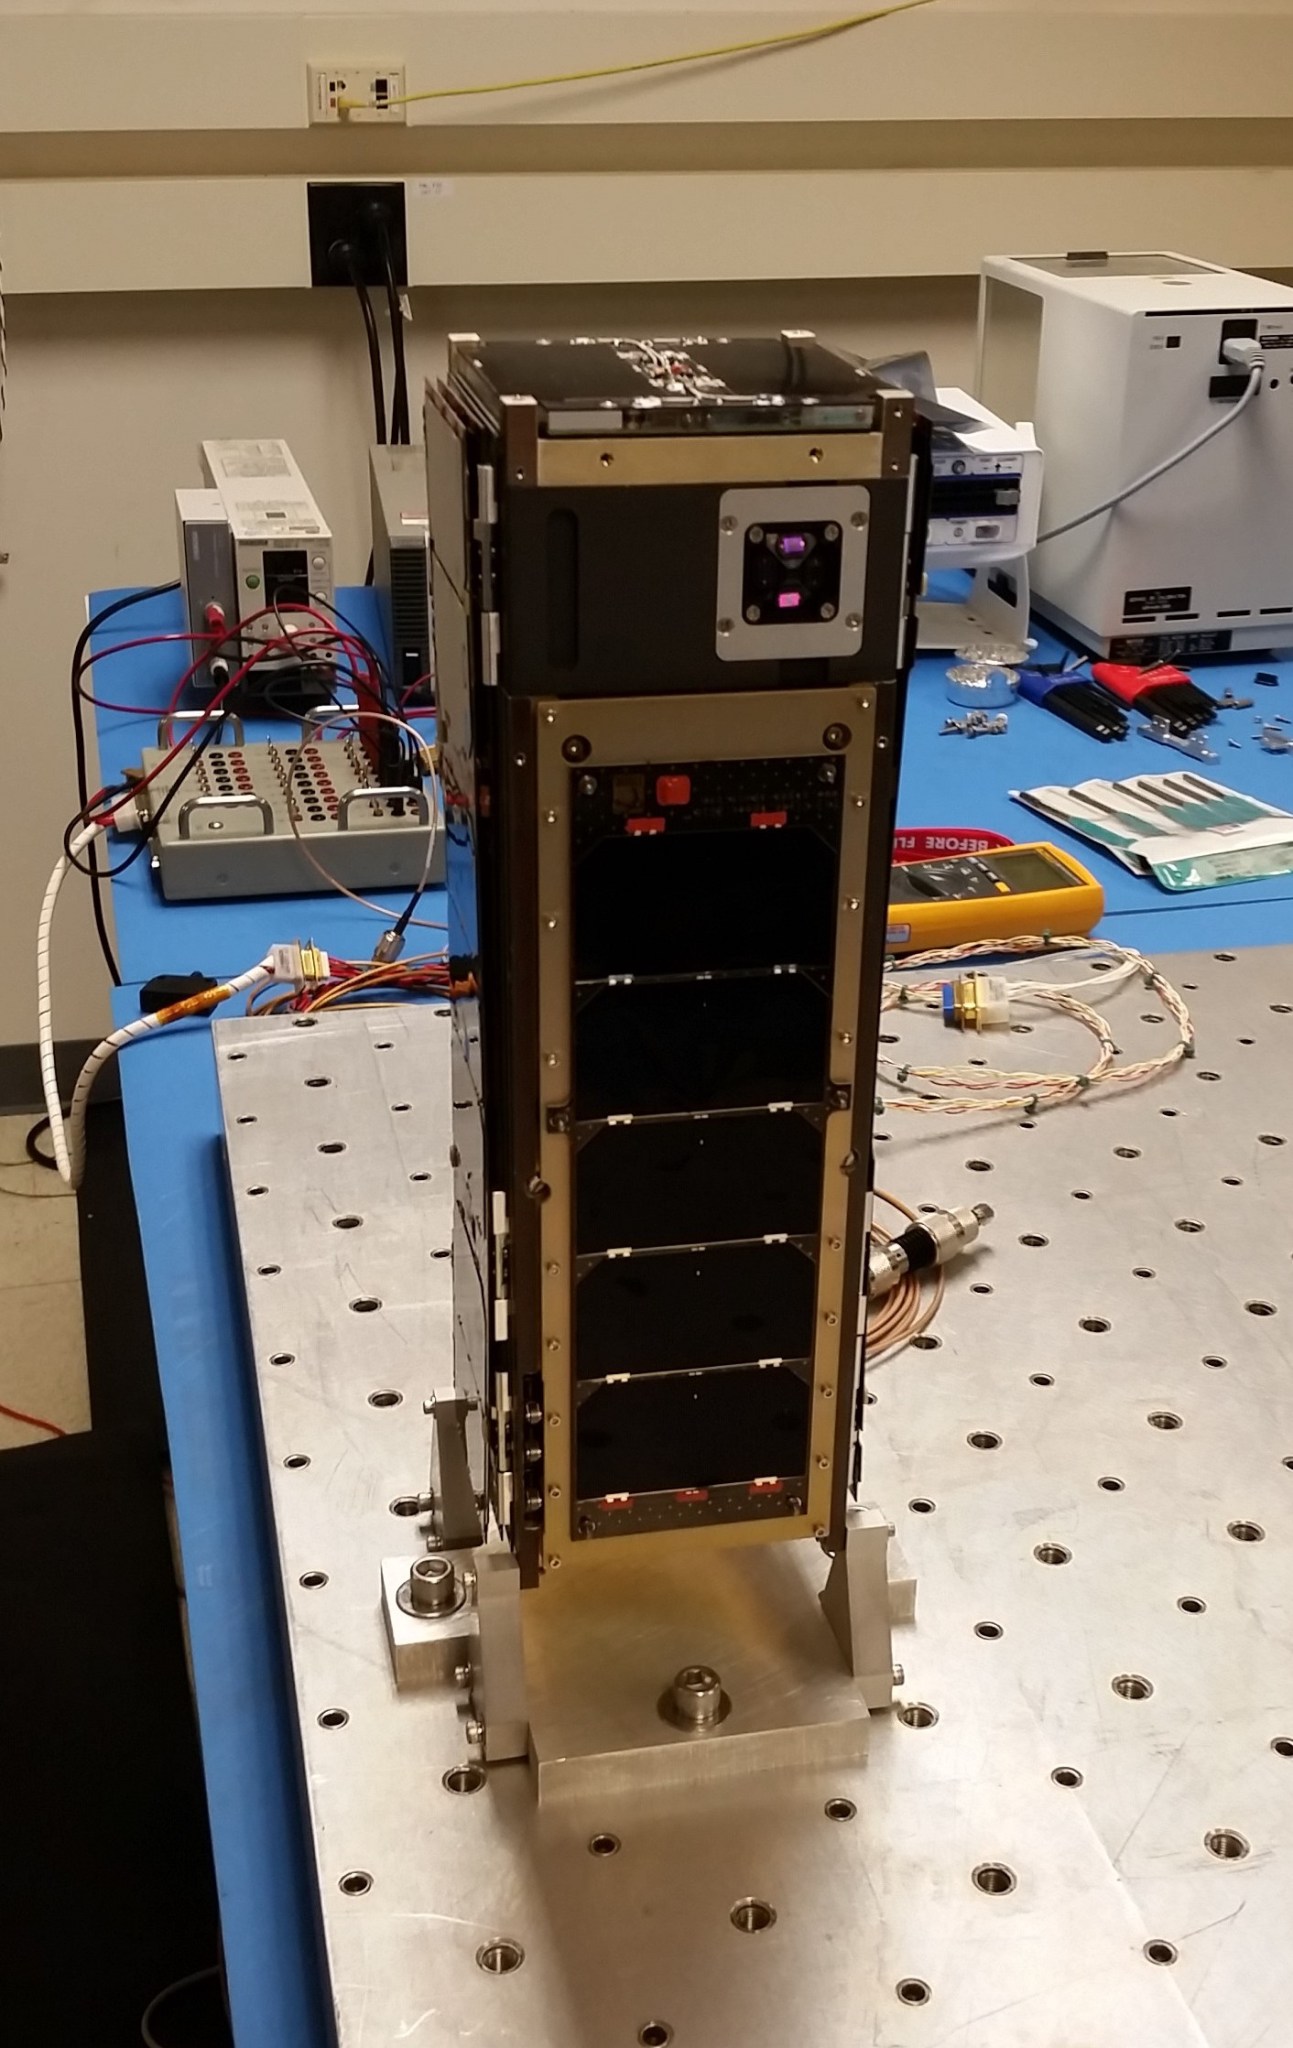 The IceCube smallsat is a small, rectangular